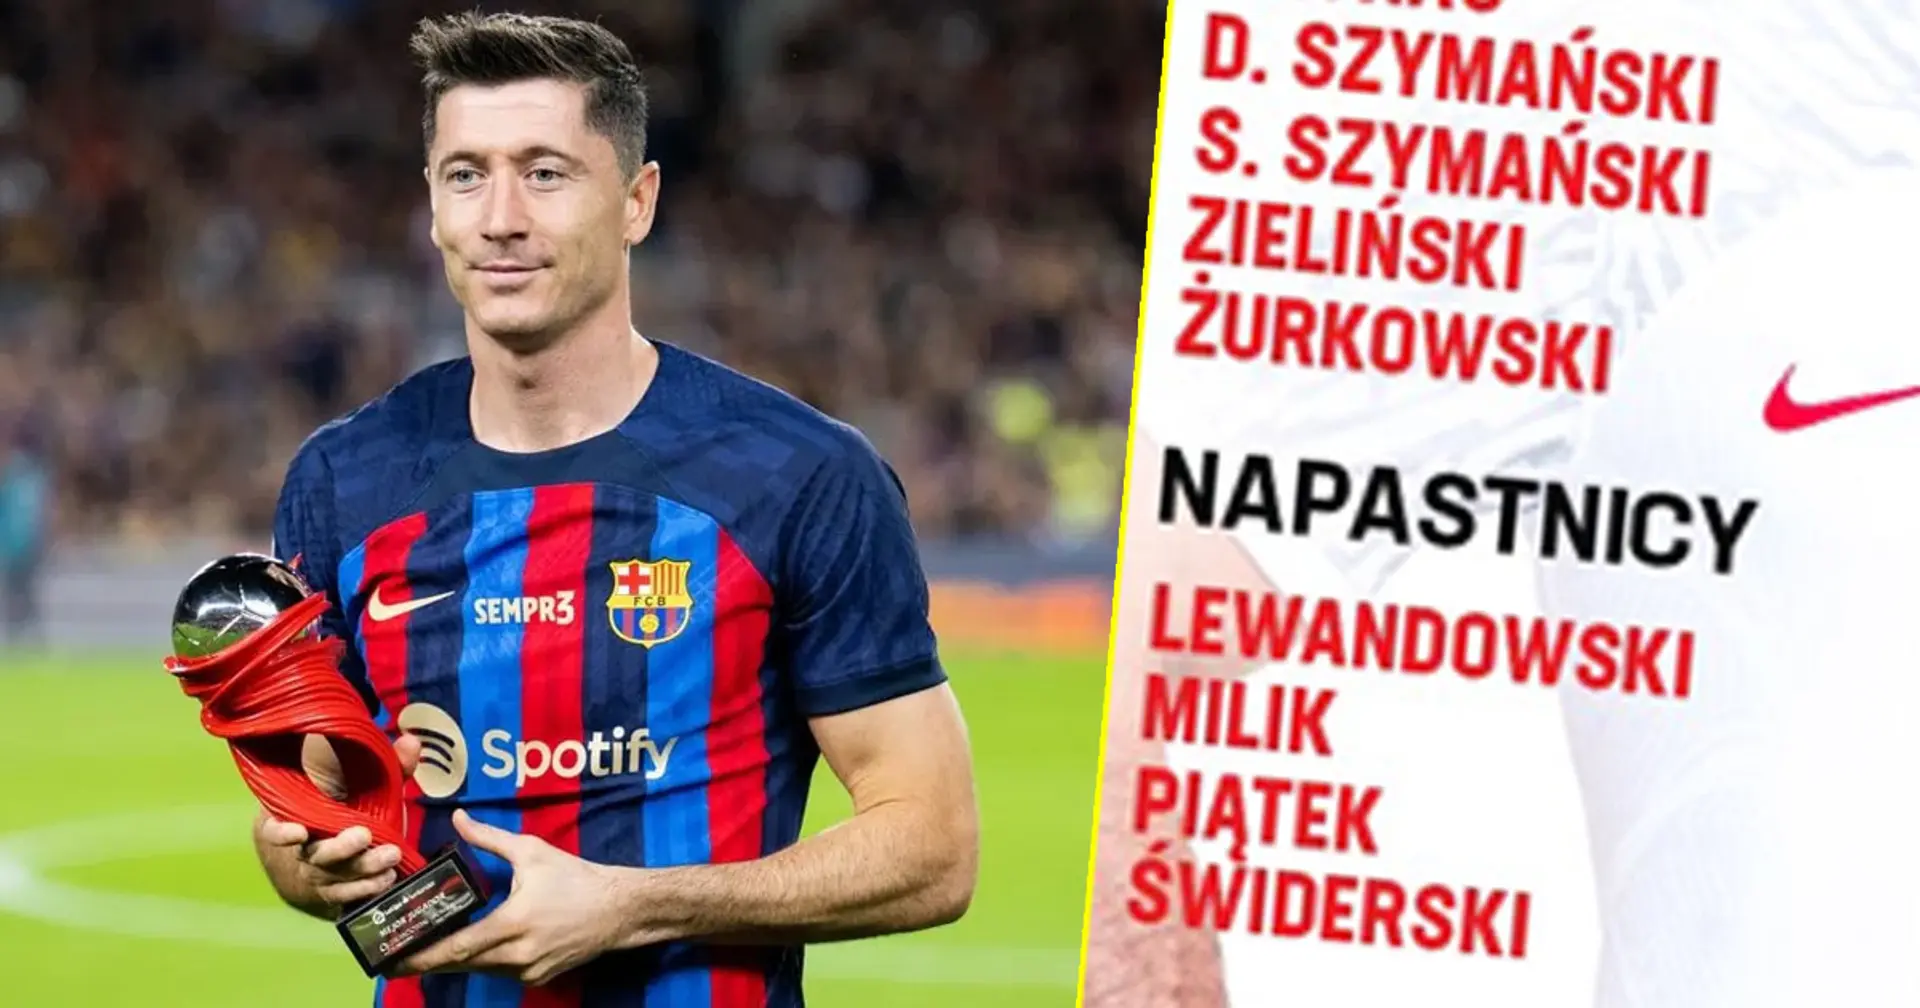 OFFICIAL: Lewandowski included in Poland's 26-man squad for World Cup